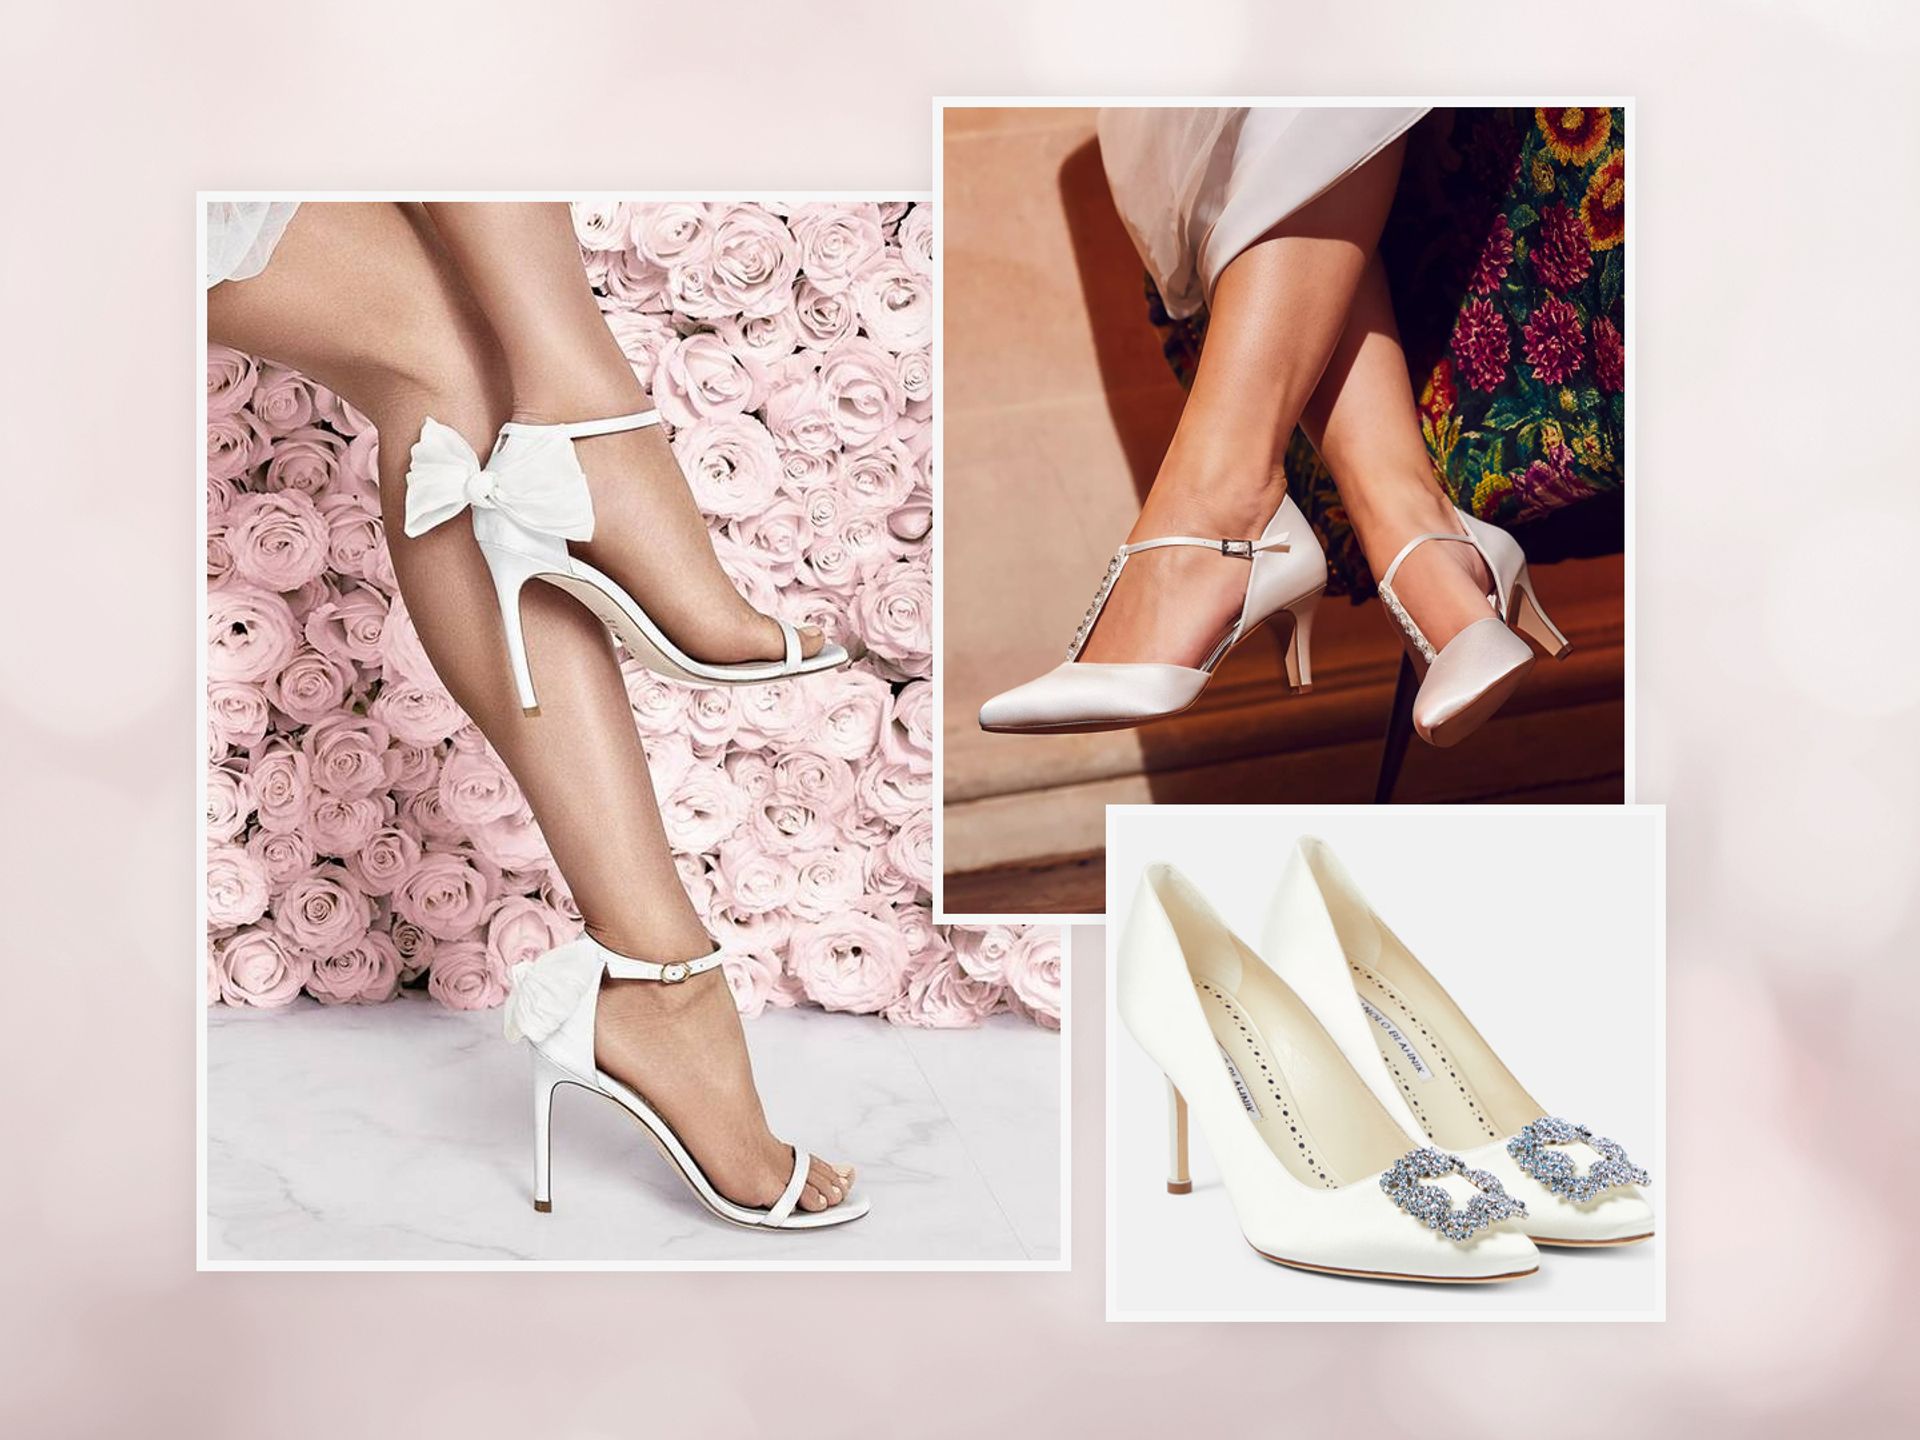 Best Bridal Shoes To Buy Now: 37 Of The Most Beautiful Heels